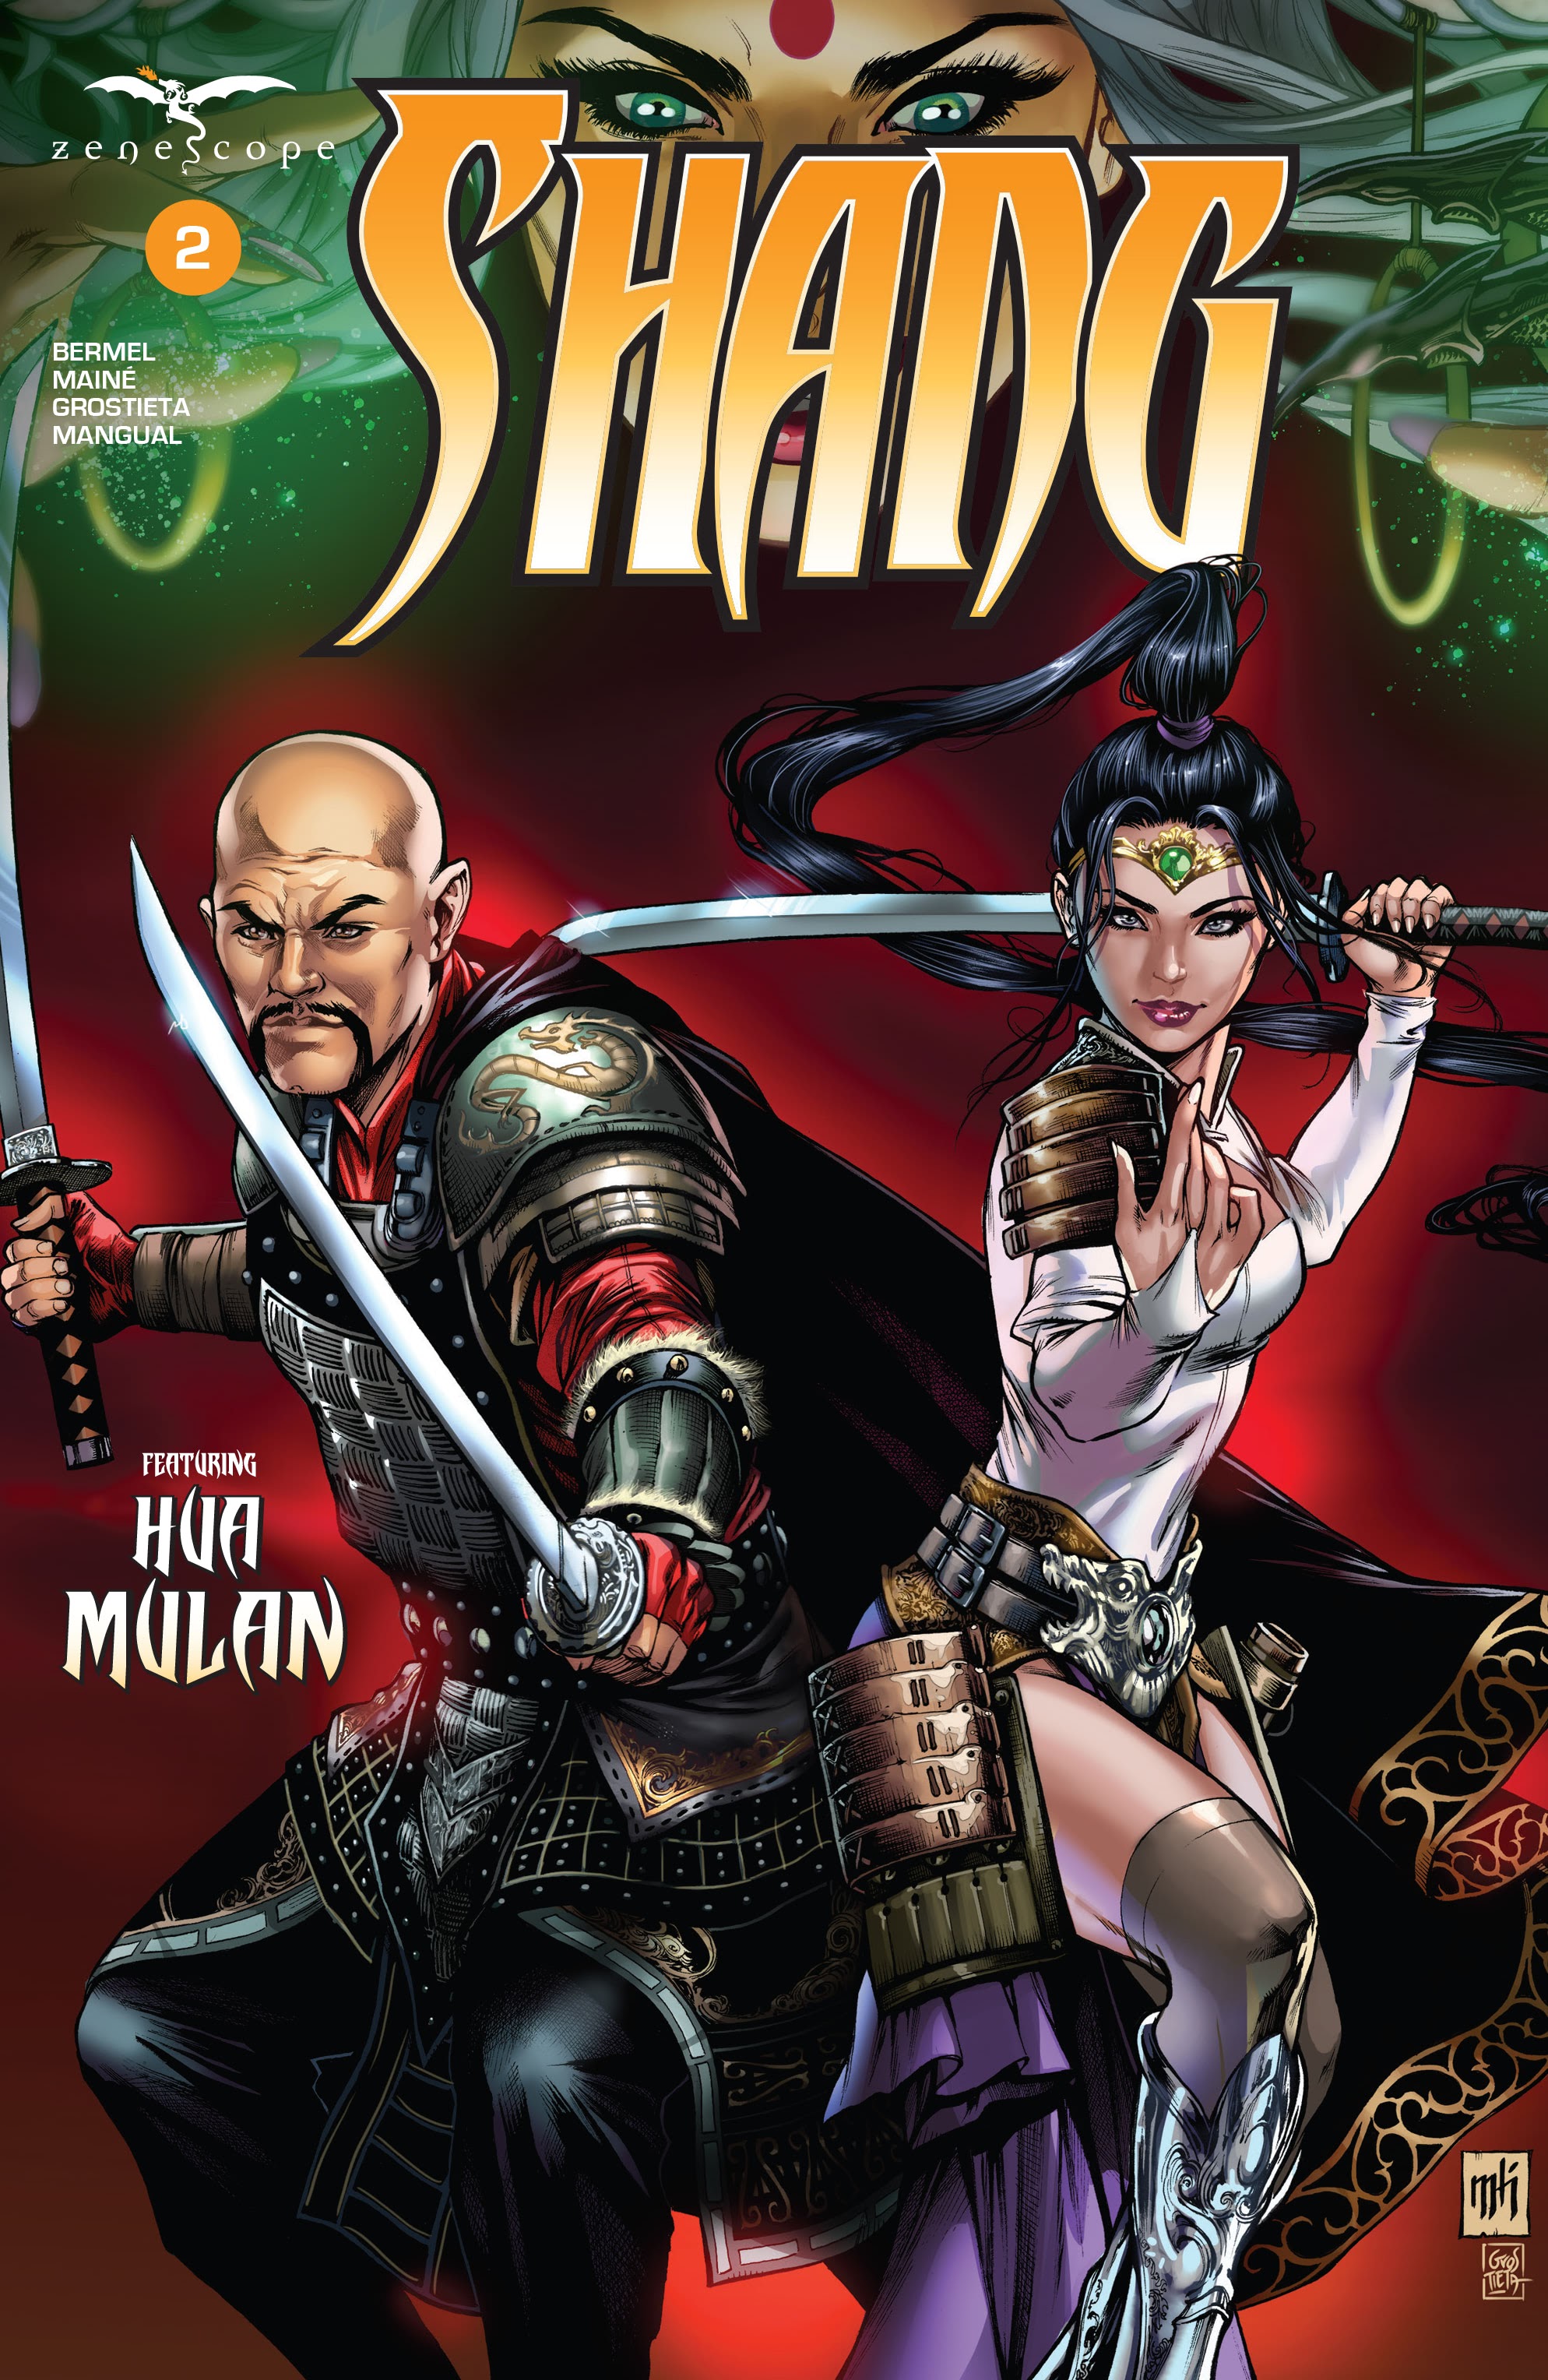 Read online Shang comic -  Issue #2 - 1